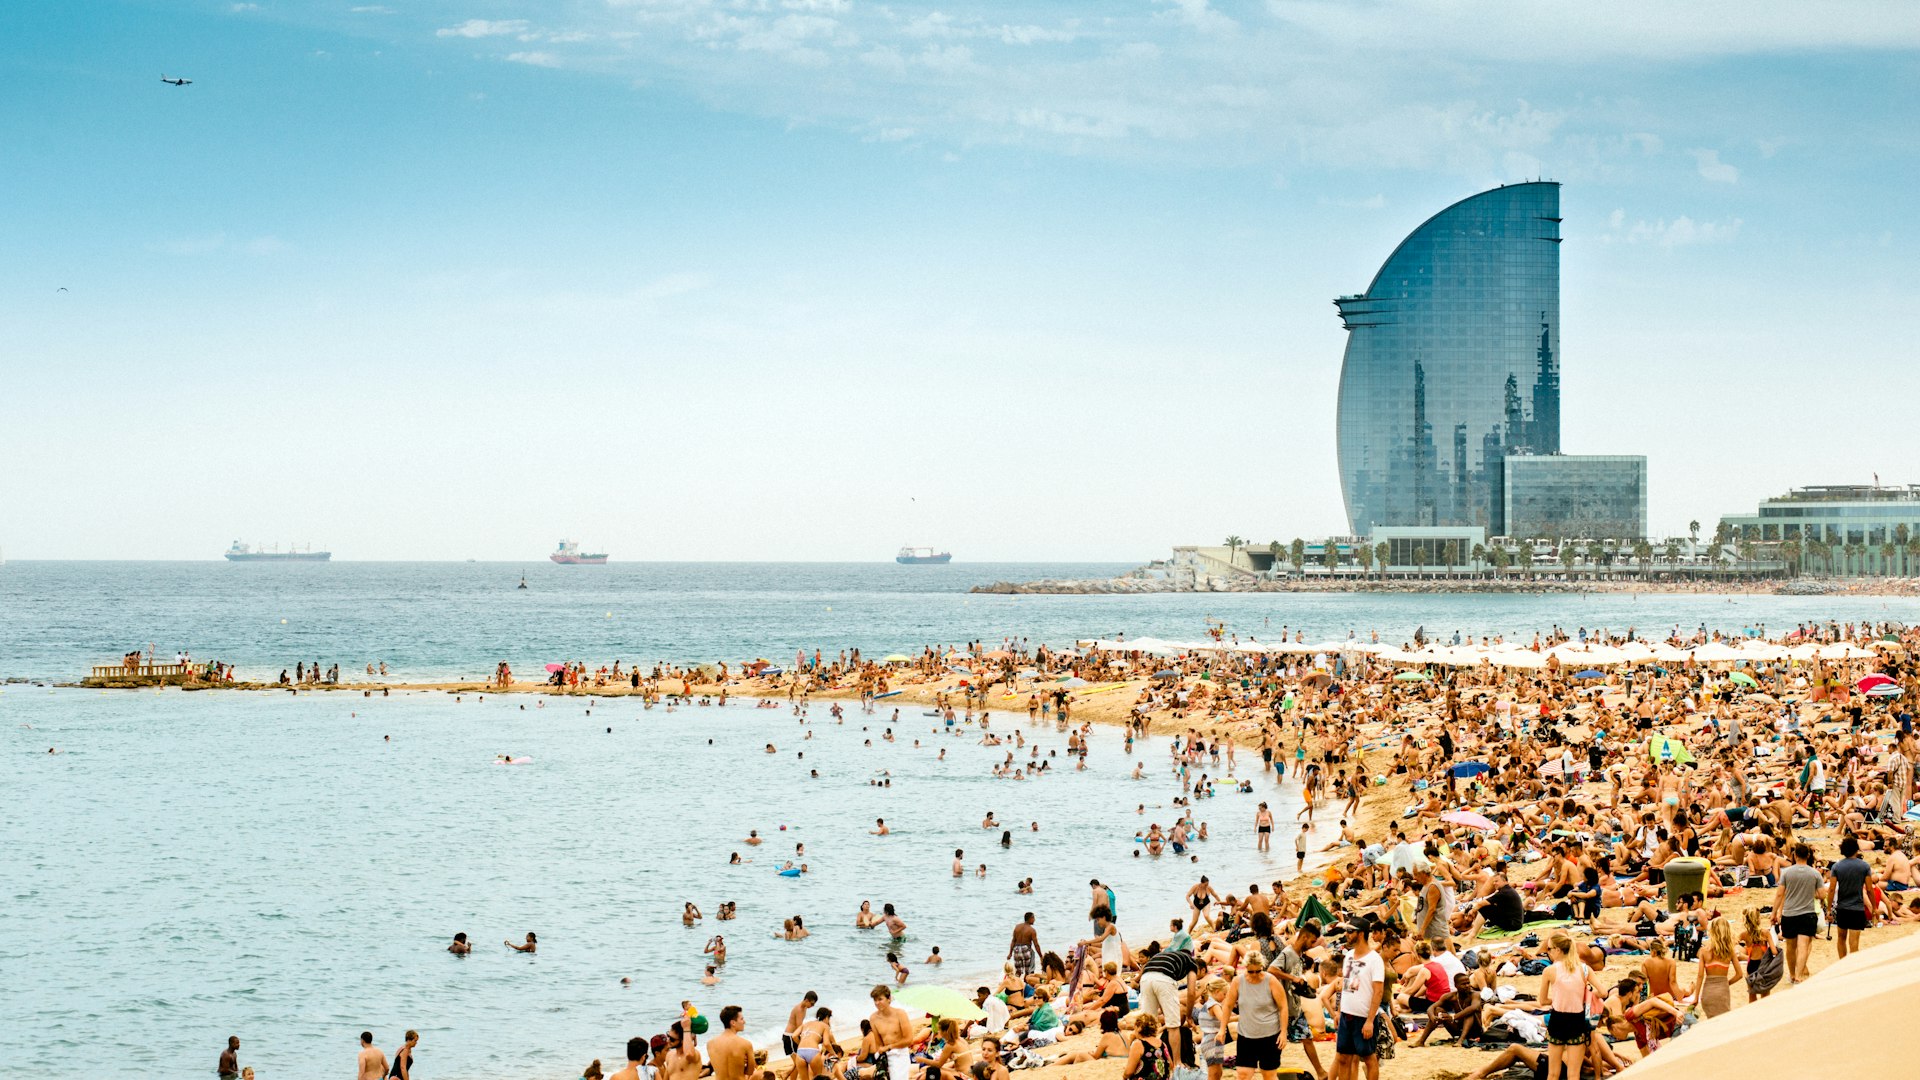 A crowded beach full of people enjoying the sunshine. A curved steel-and-glass building is at the end of the beach